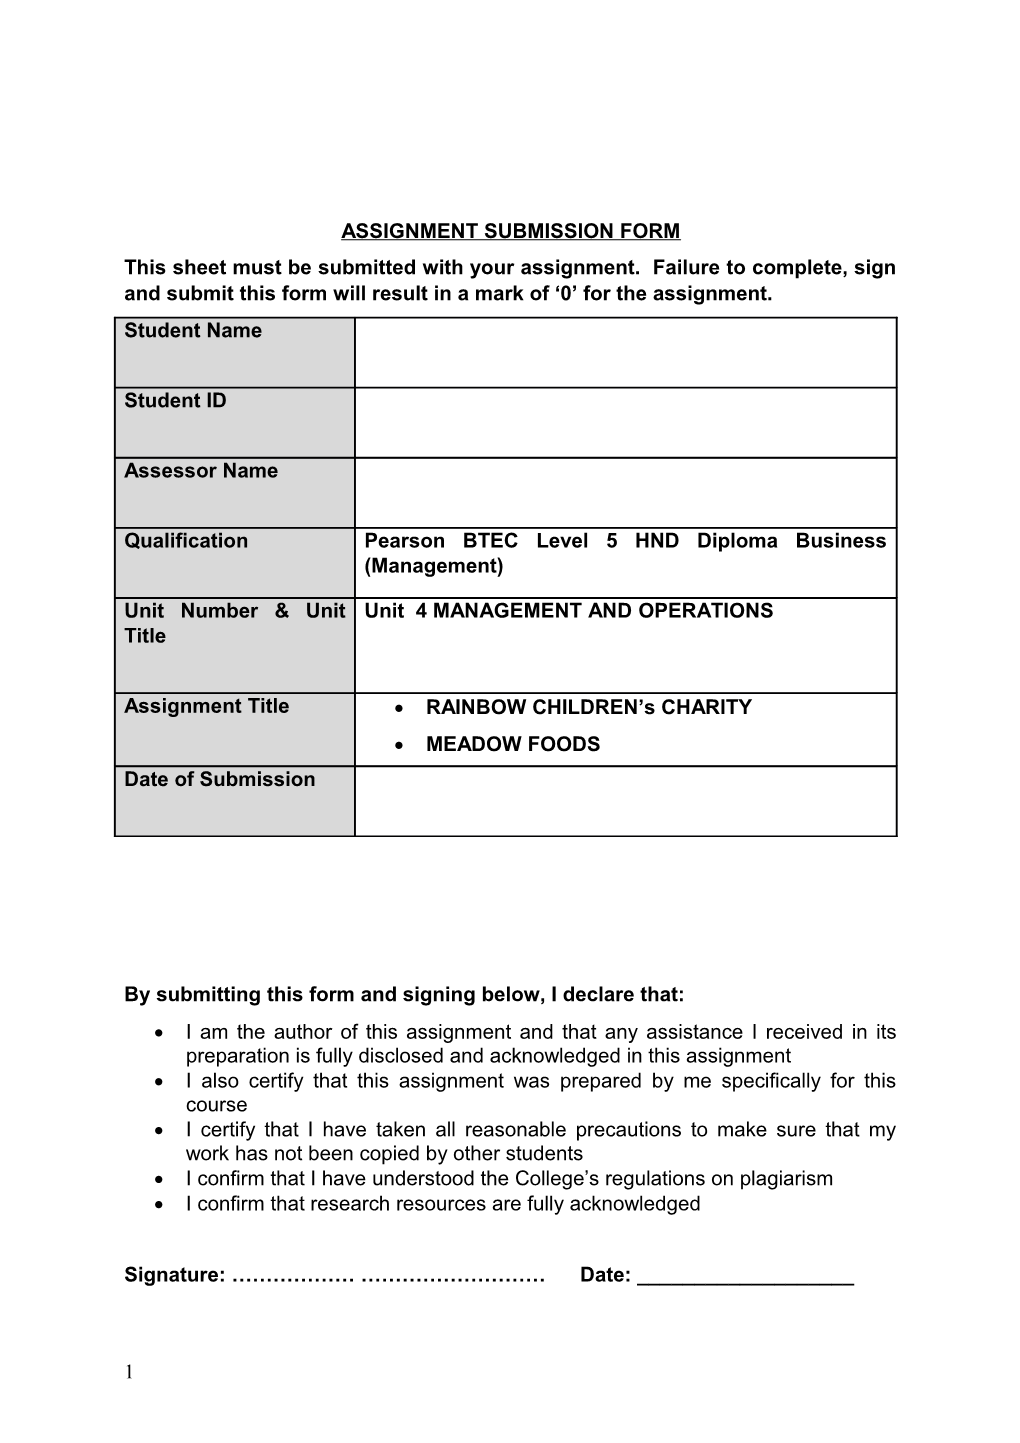 Assignment Submission Form